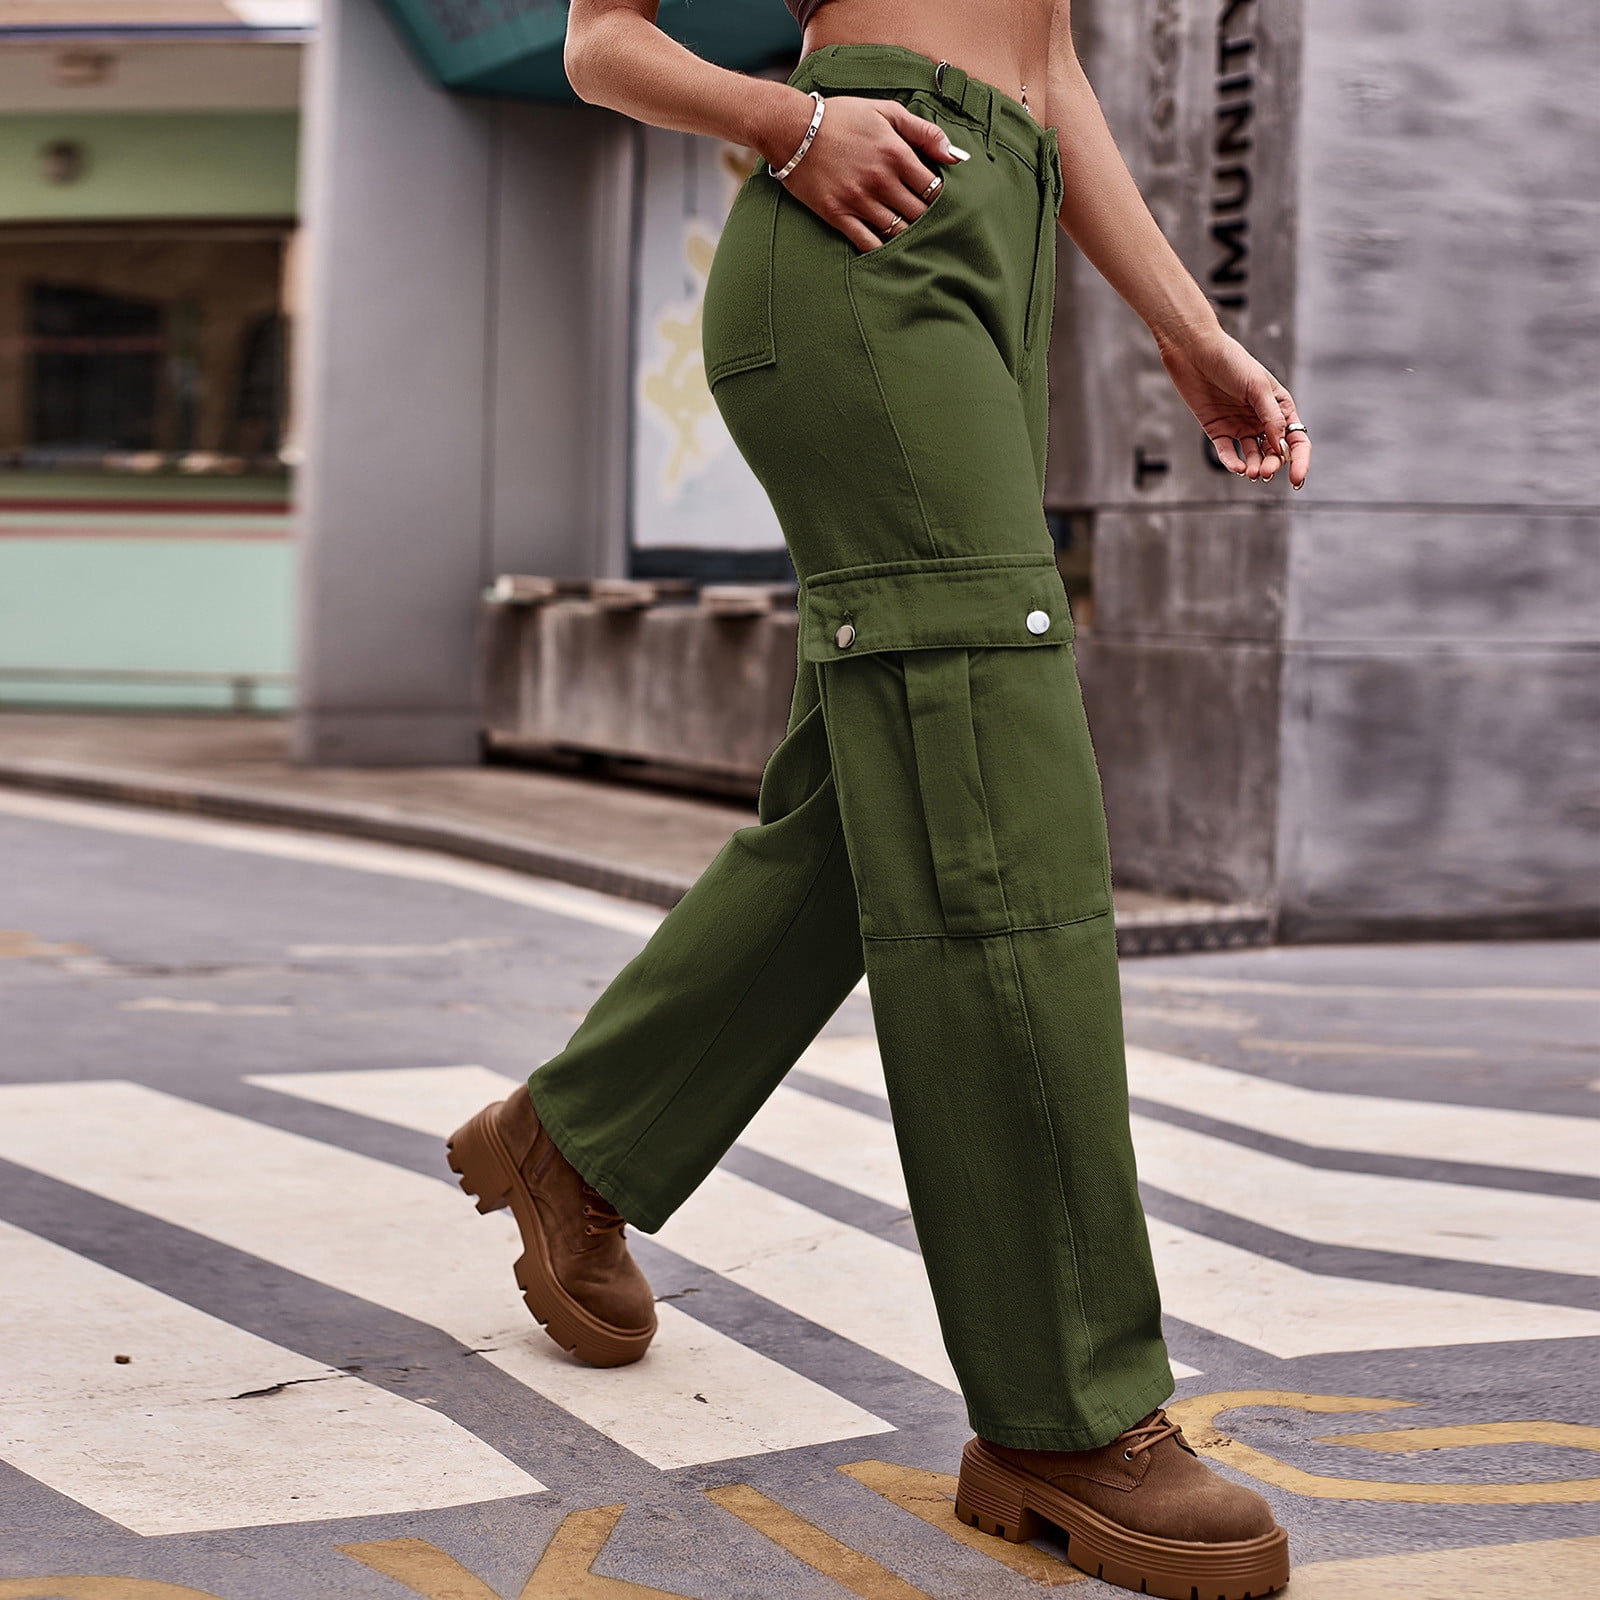 Mrat Full Length Pants Comfy Pants Women Ladies Casual Two-Piece Suit Of  Floral Print Strapless Tube Top And Trousers Petite Pants - Walmart.com